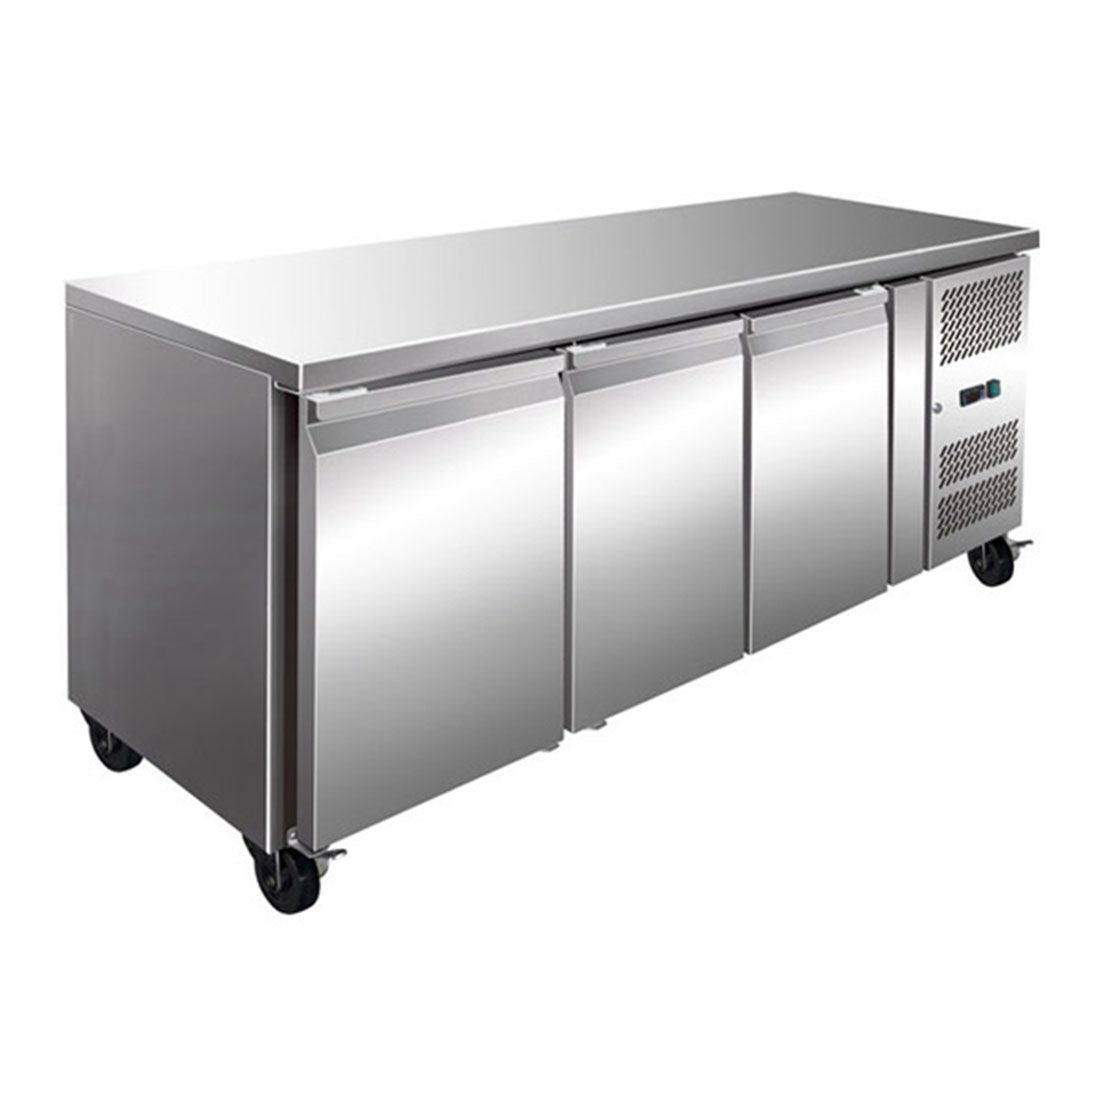 2NDs: TROPICALISED 3 Door Gastronorm Bench Fridge GN3100TN-NSW1618